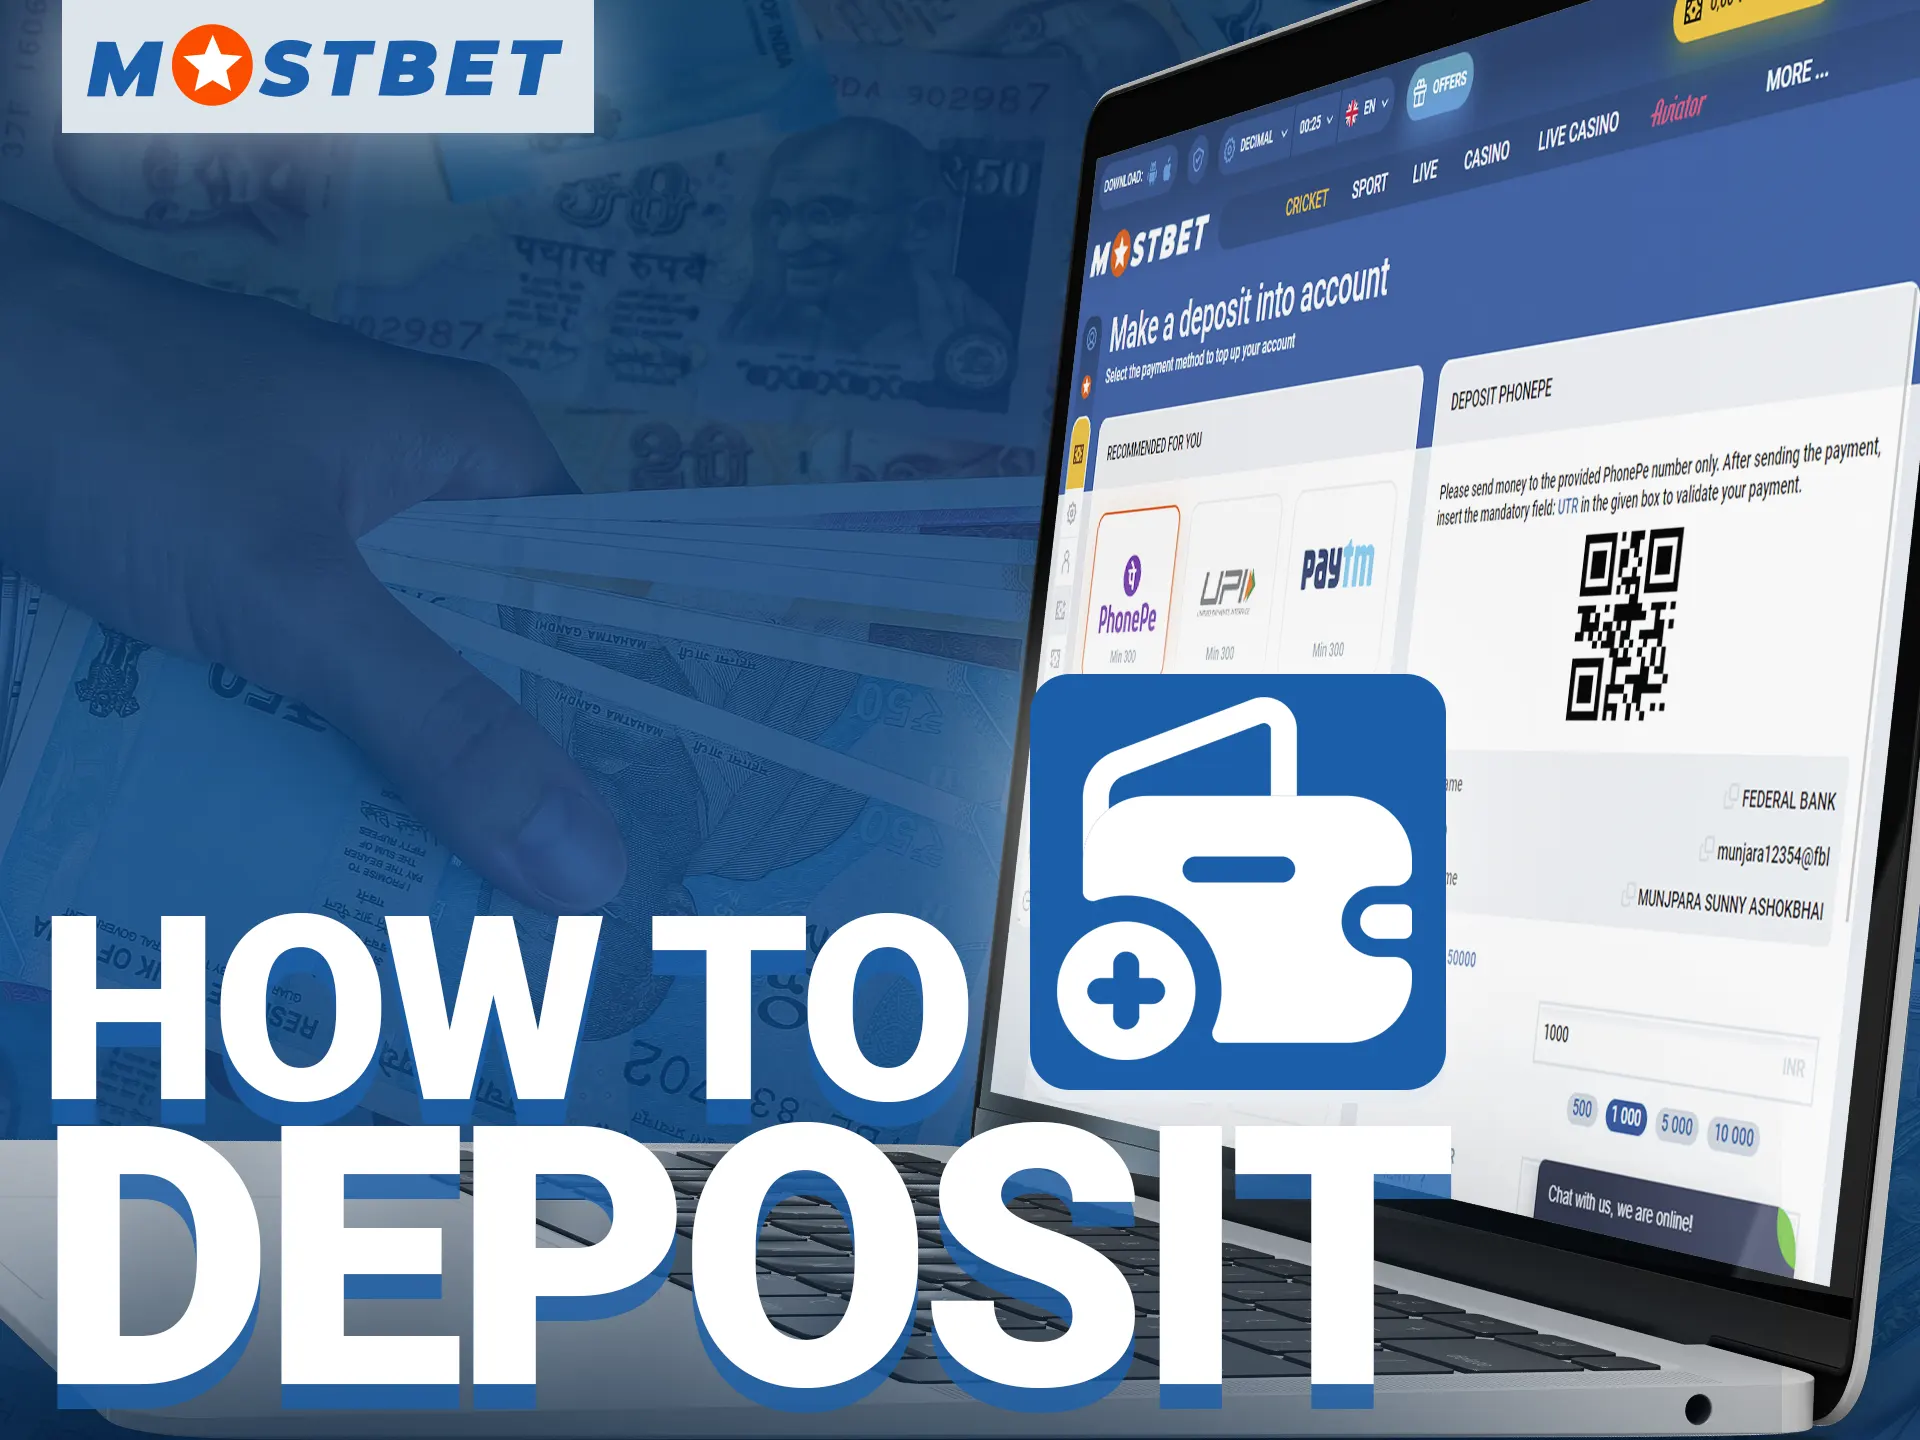 Make your first deposit on the Mostbet website.